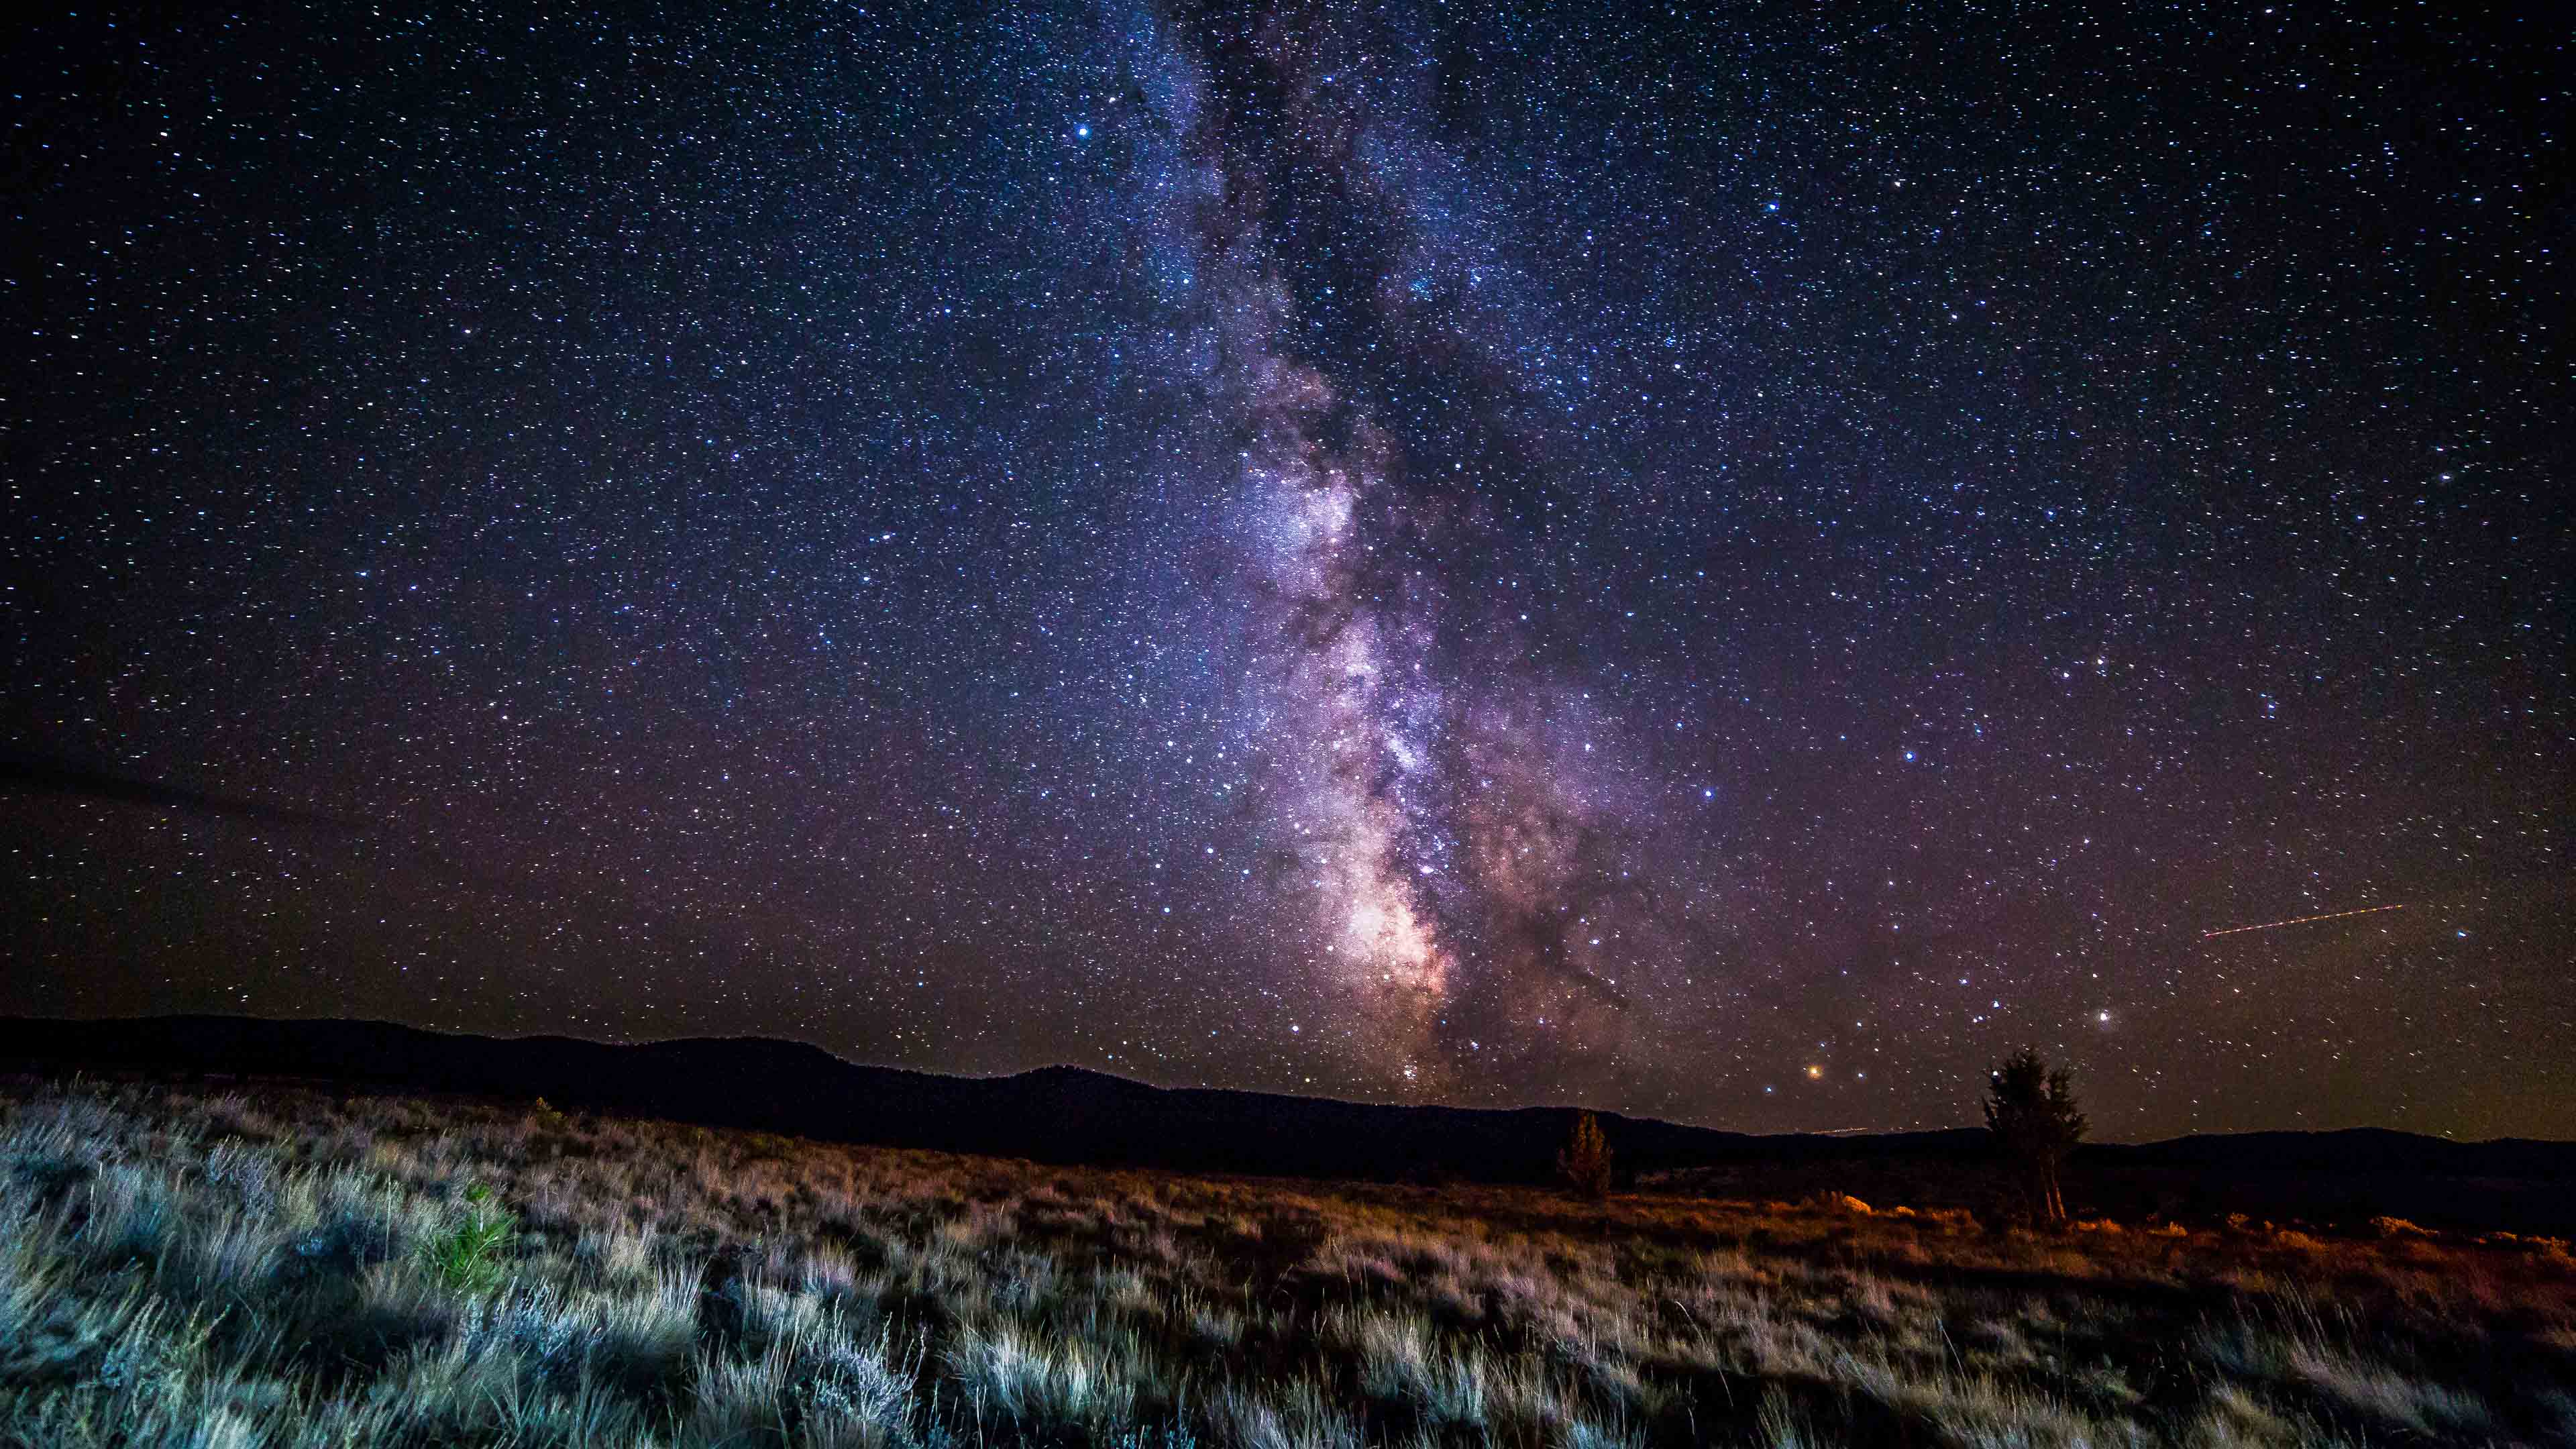 Starry sky near Barnhouse Campground, John Day Fossil Beds National Monument